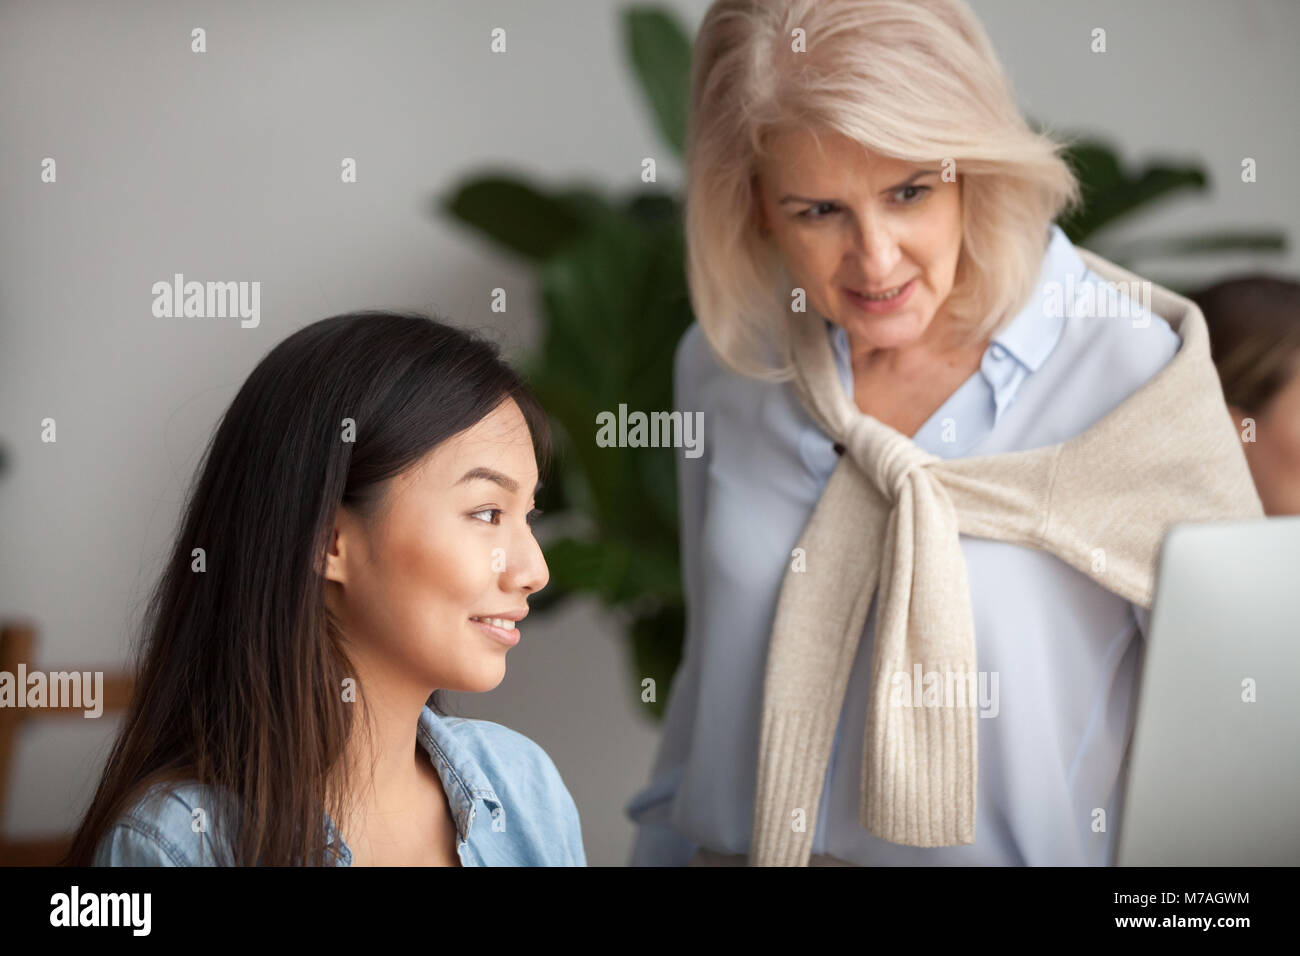 Smiling aged leader checking work or teaching young asian employ Stock Photo